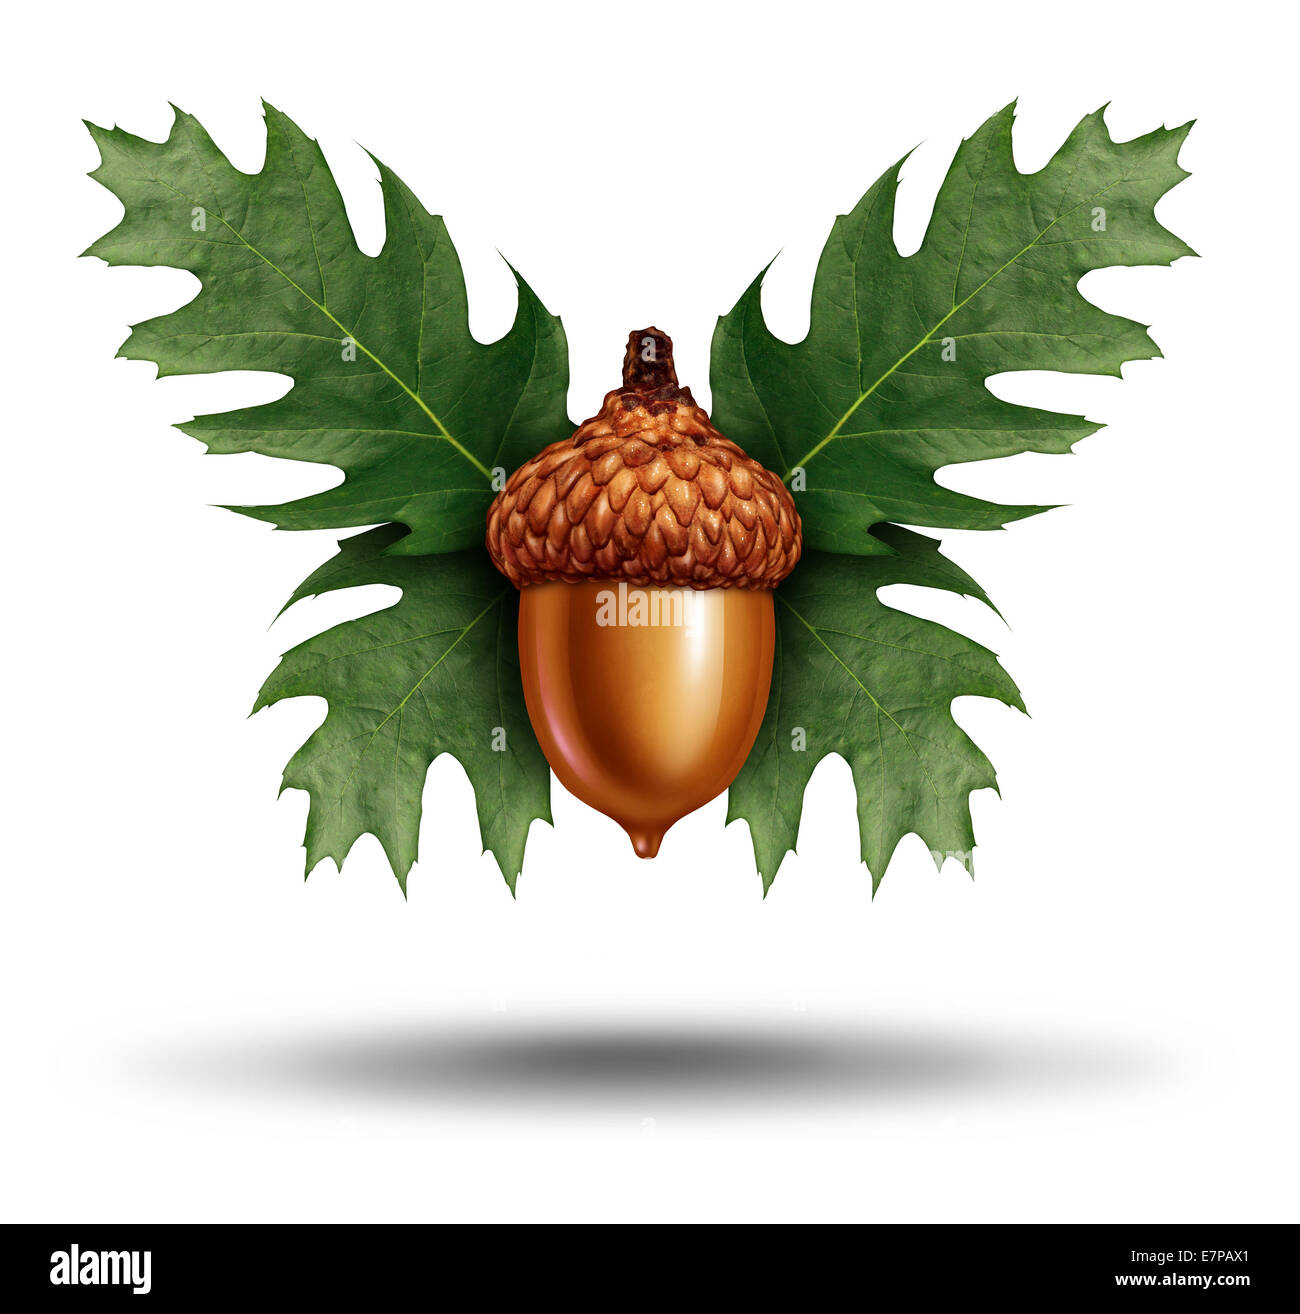 Savings investment freedom as an acorn flying up using leaves shaped as butterfly wings as a financial business symbol for future wealth growth success or growing your saved money. Stock Photo